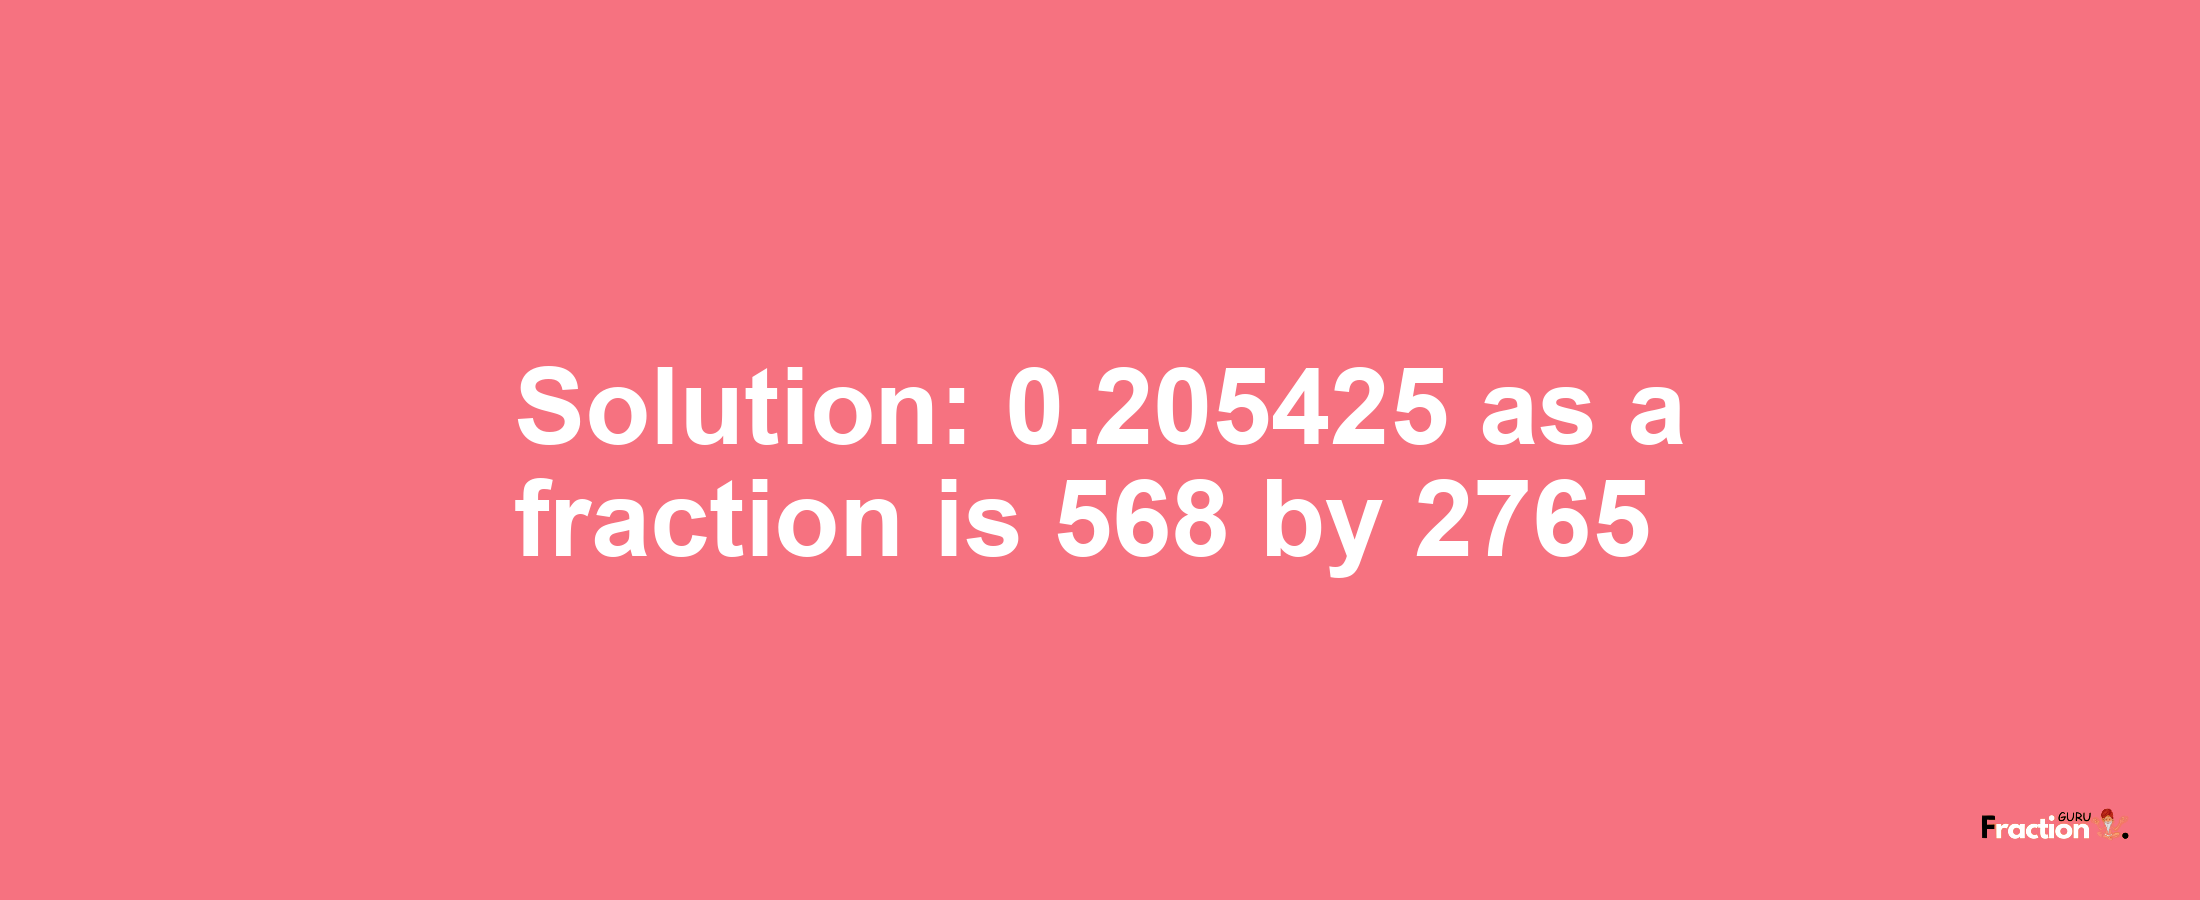 Solution:0.205425 as a fraction is 568/2765